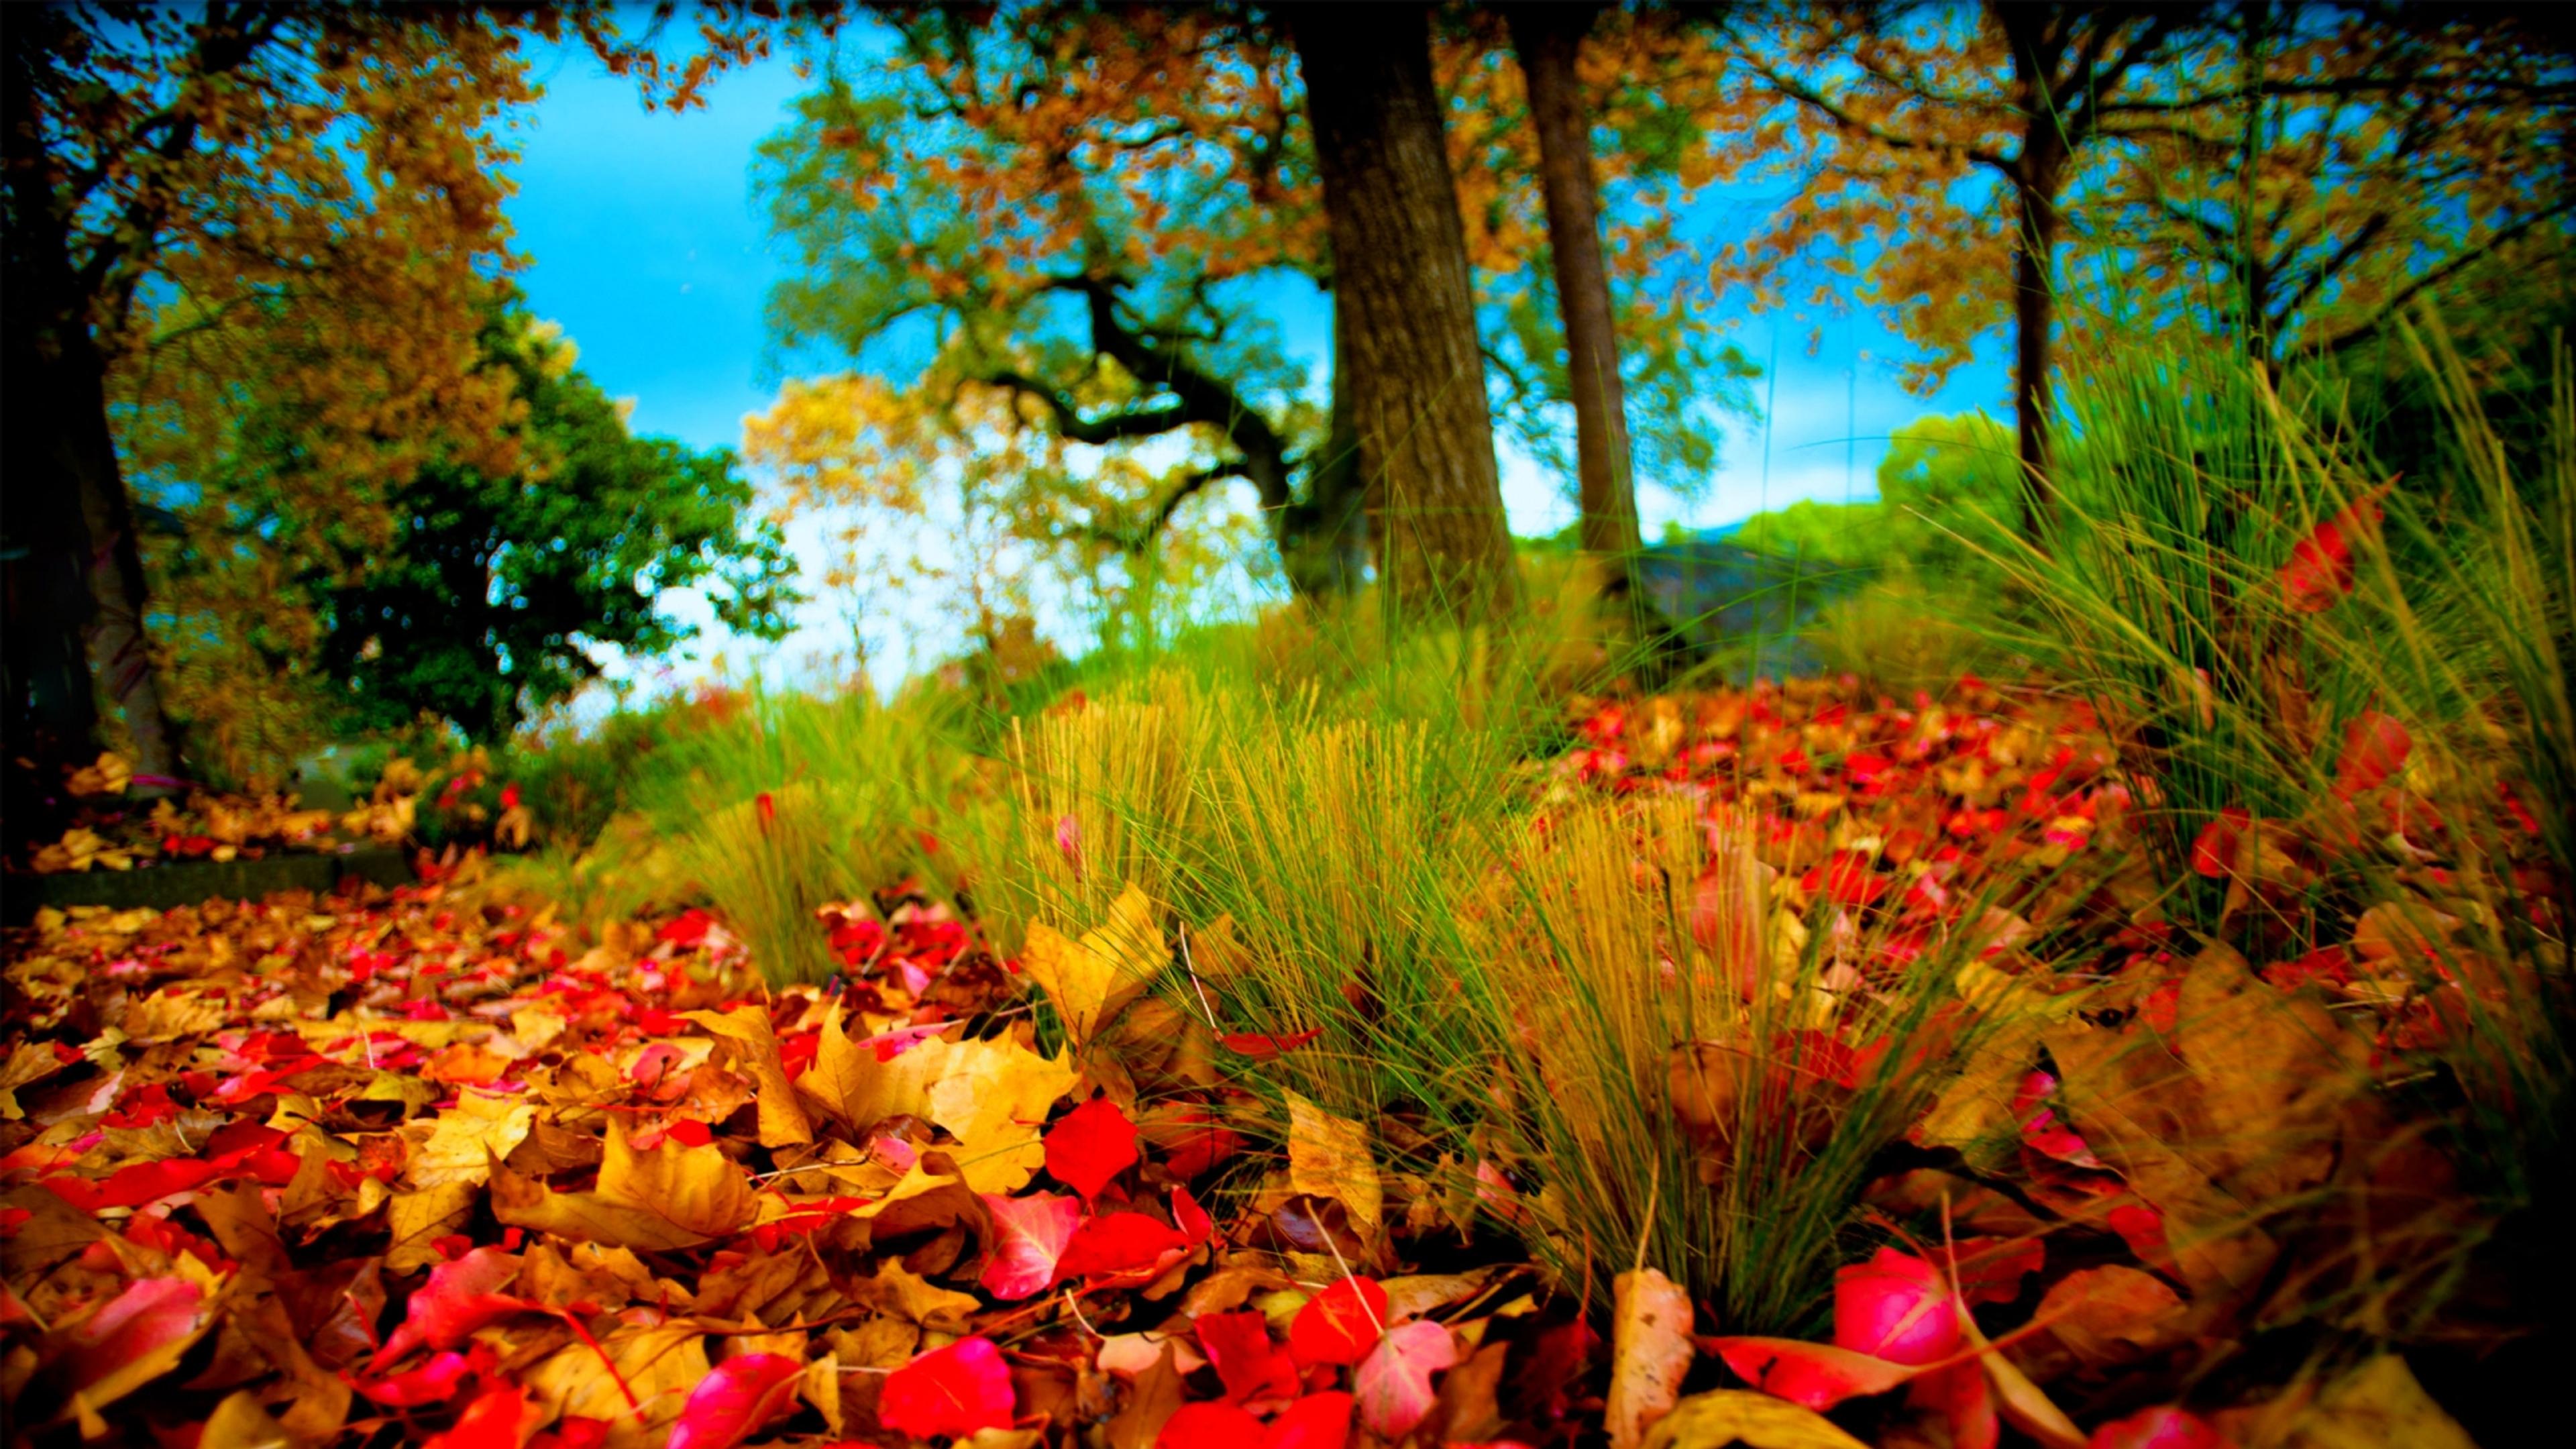 Autumn leaves on the field - beautiful nature wallpaper